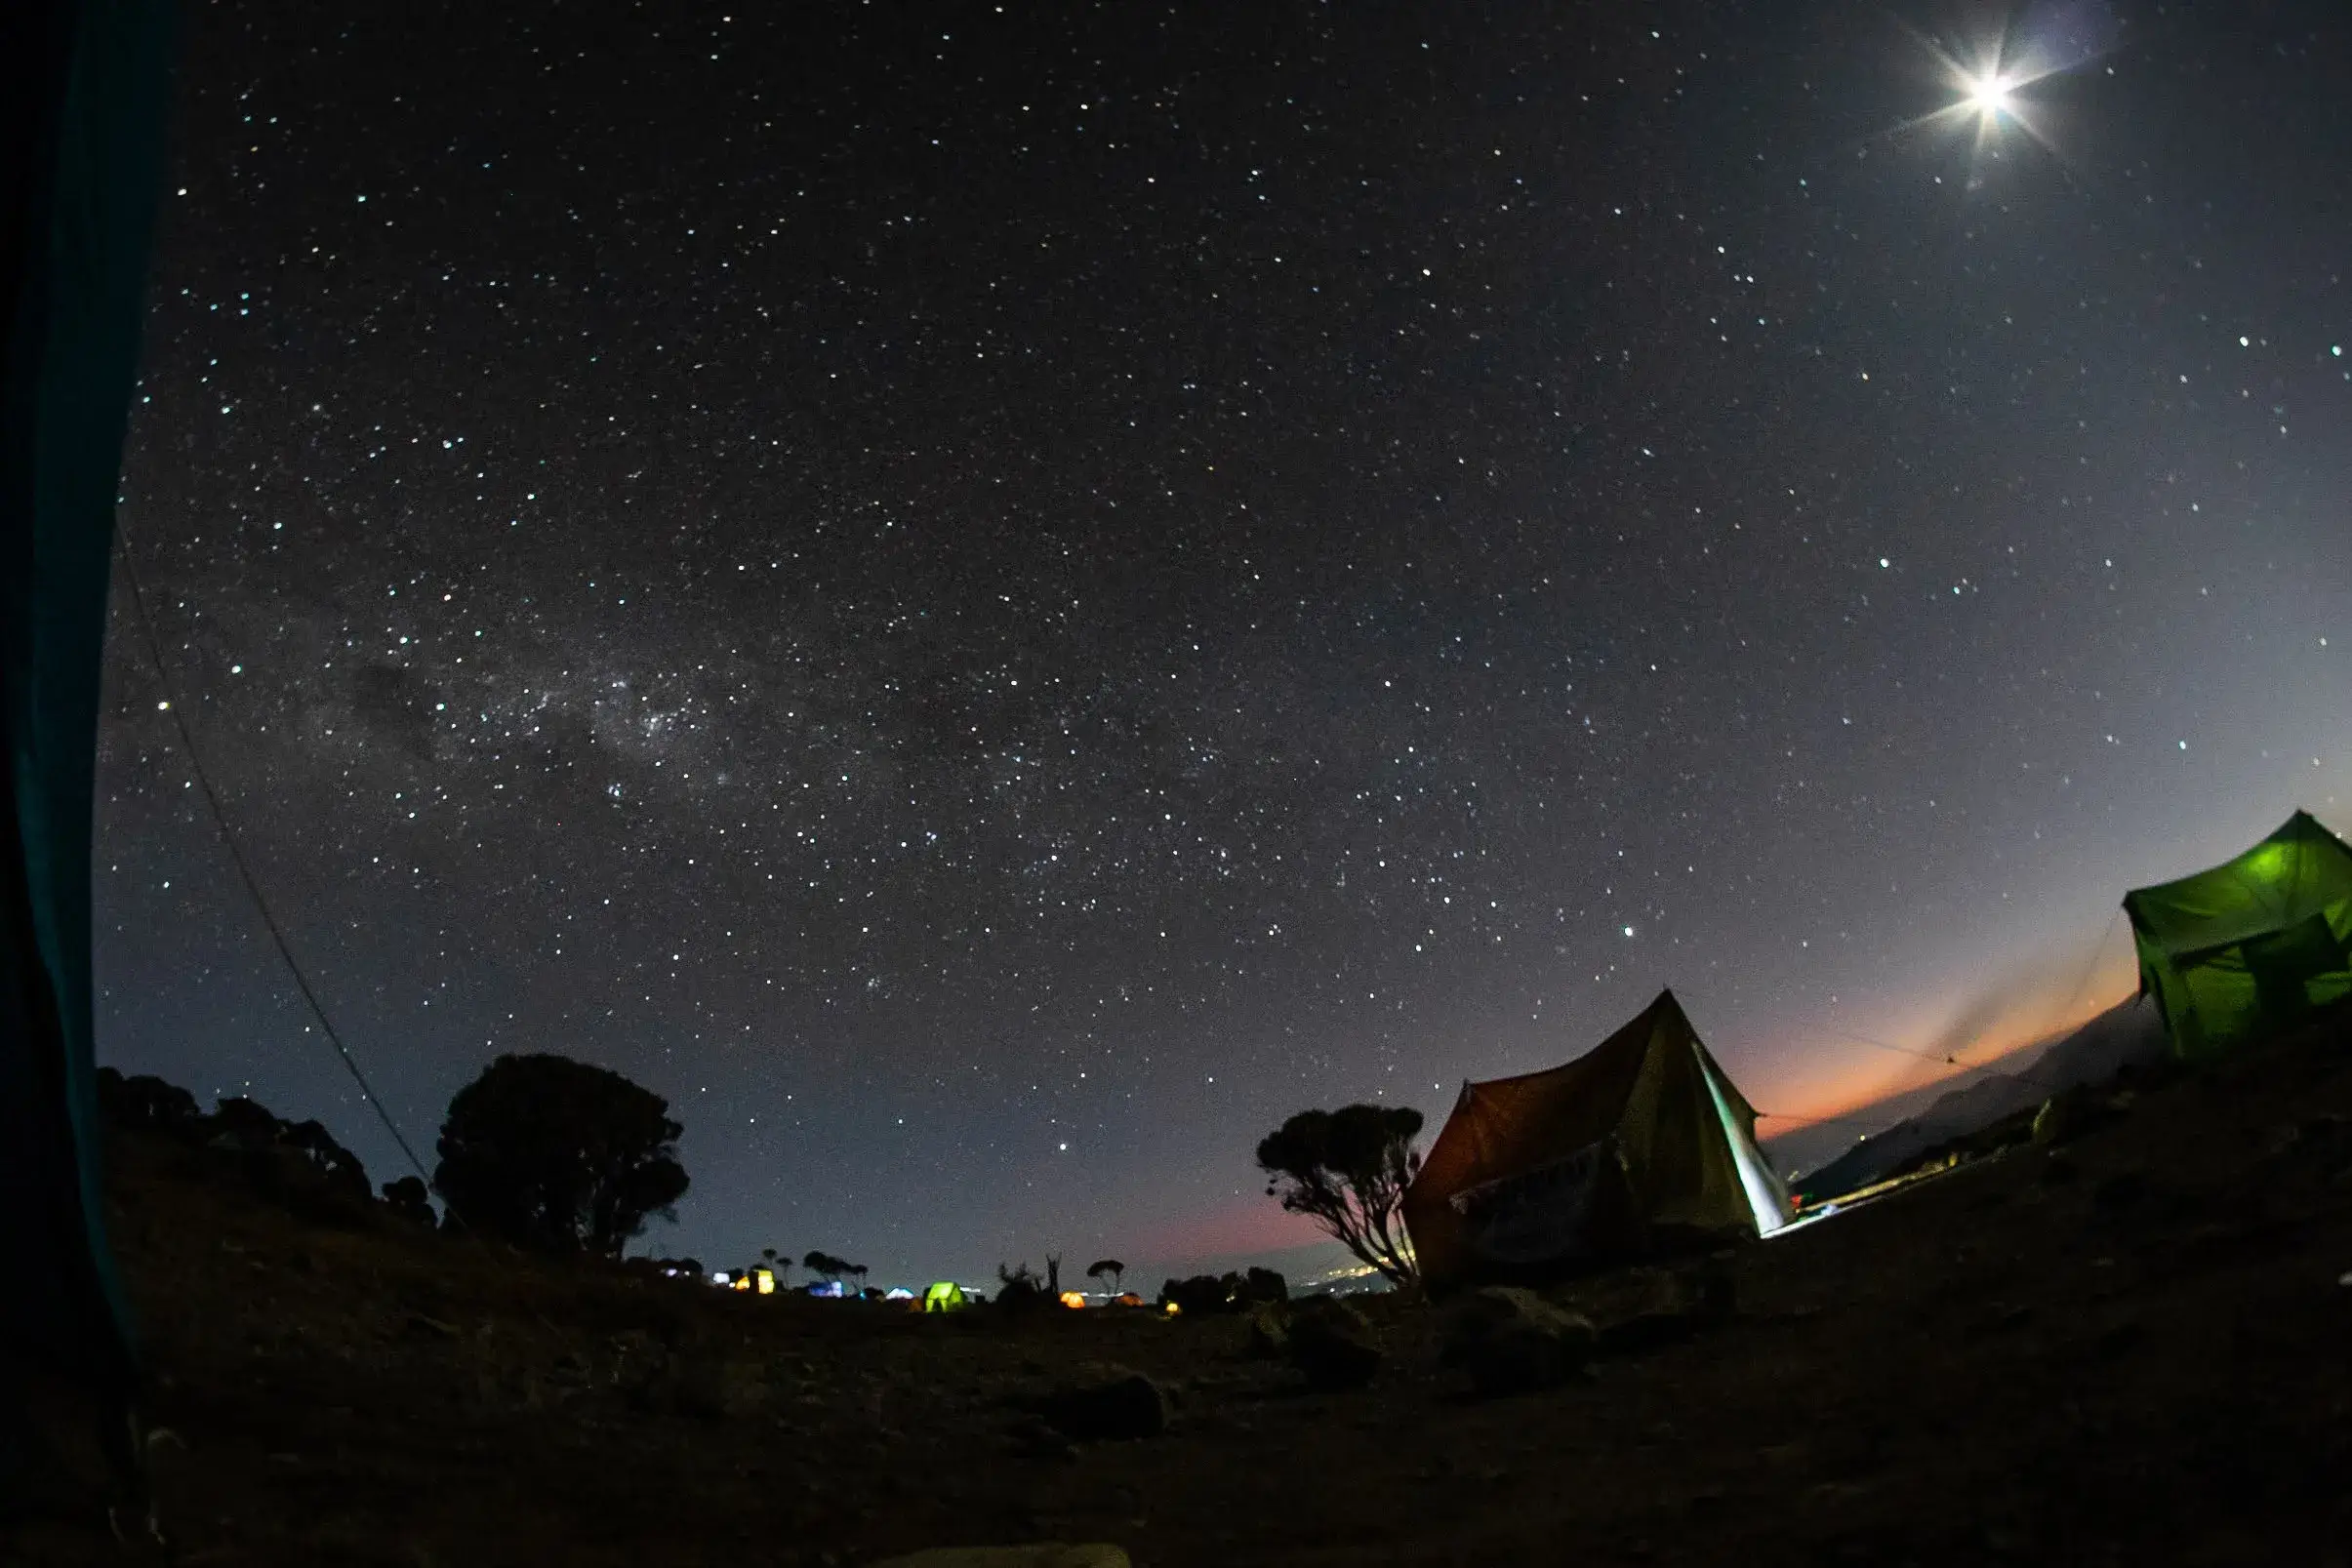 Night view of stars and Camping tents of afrikan adventures in treks.